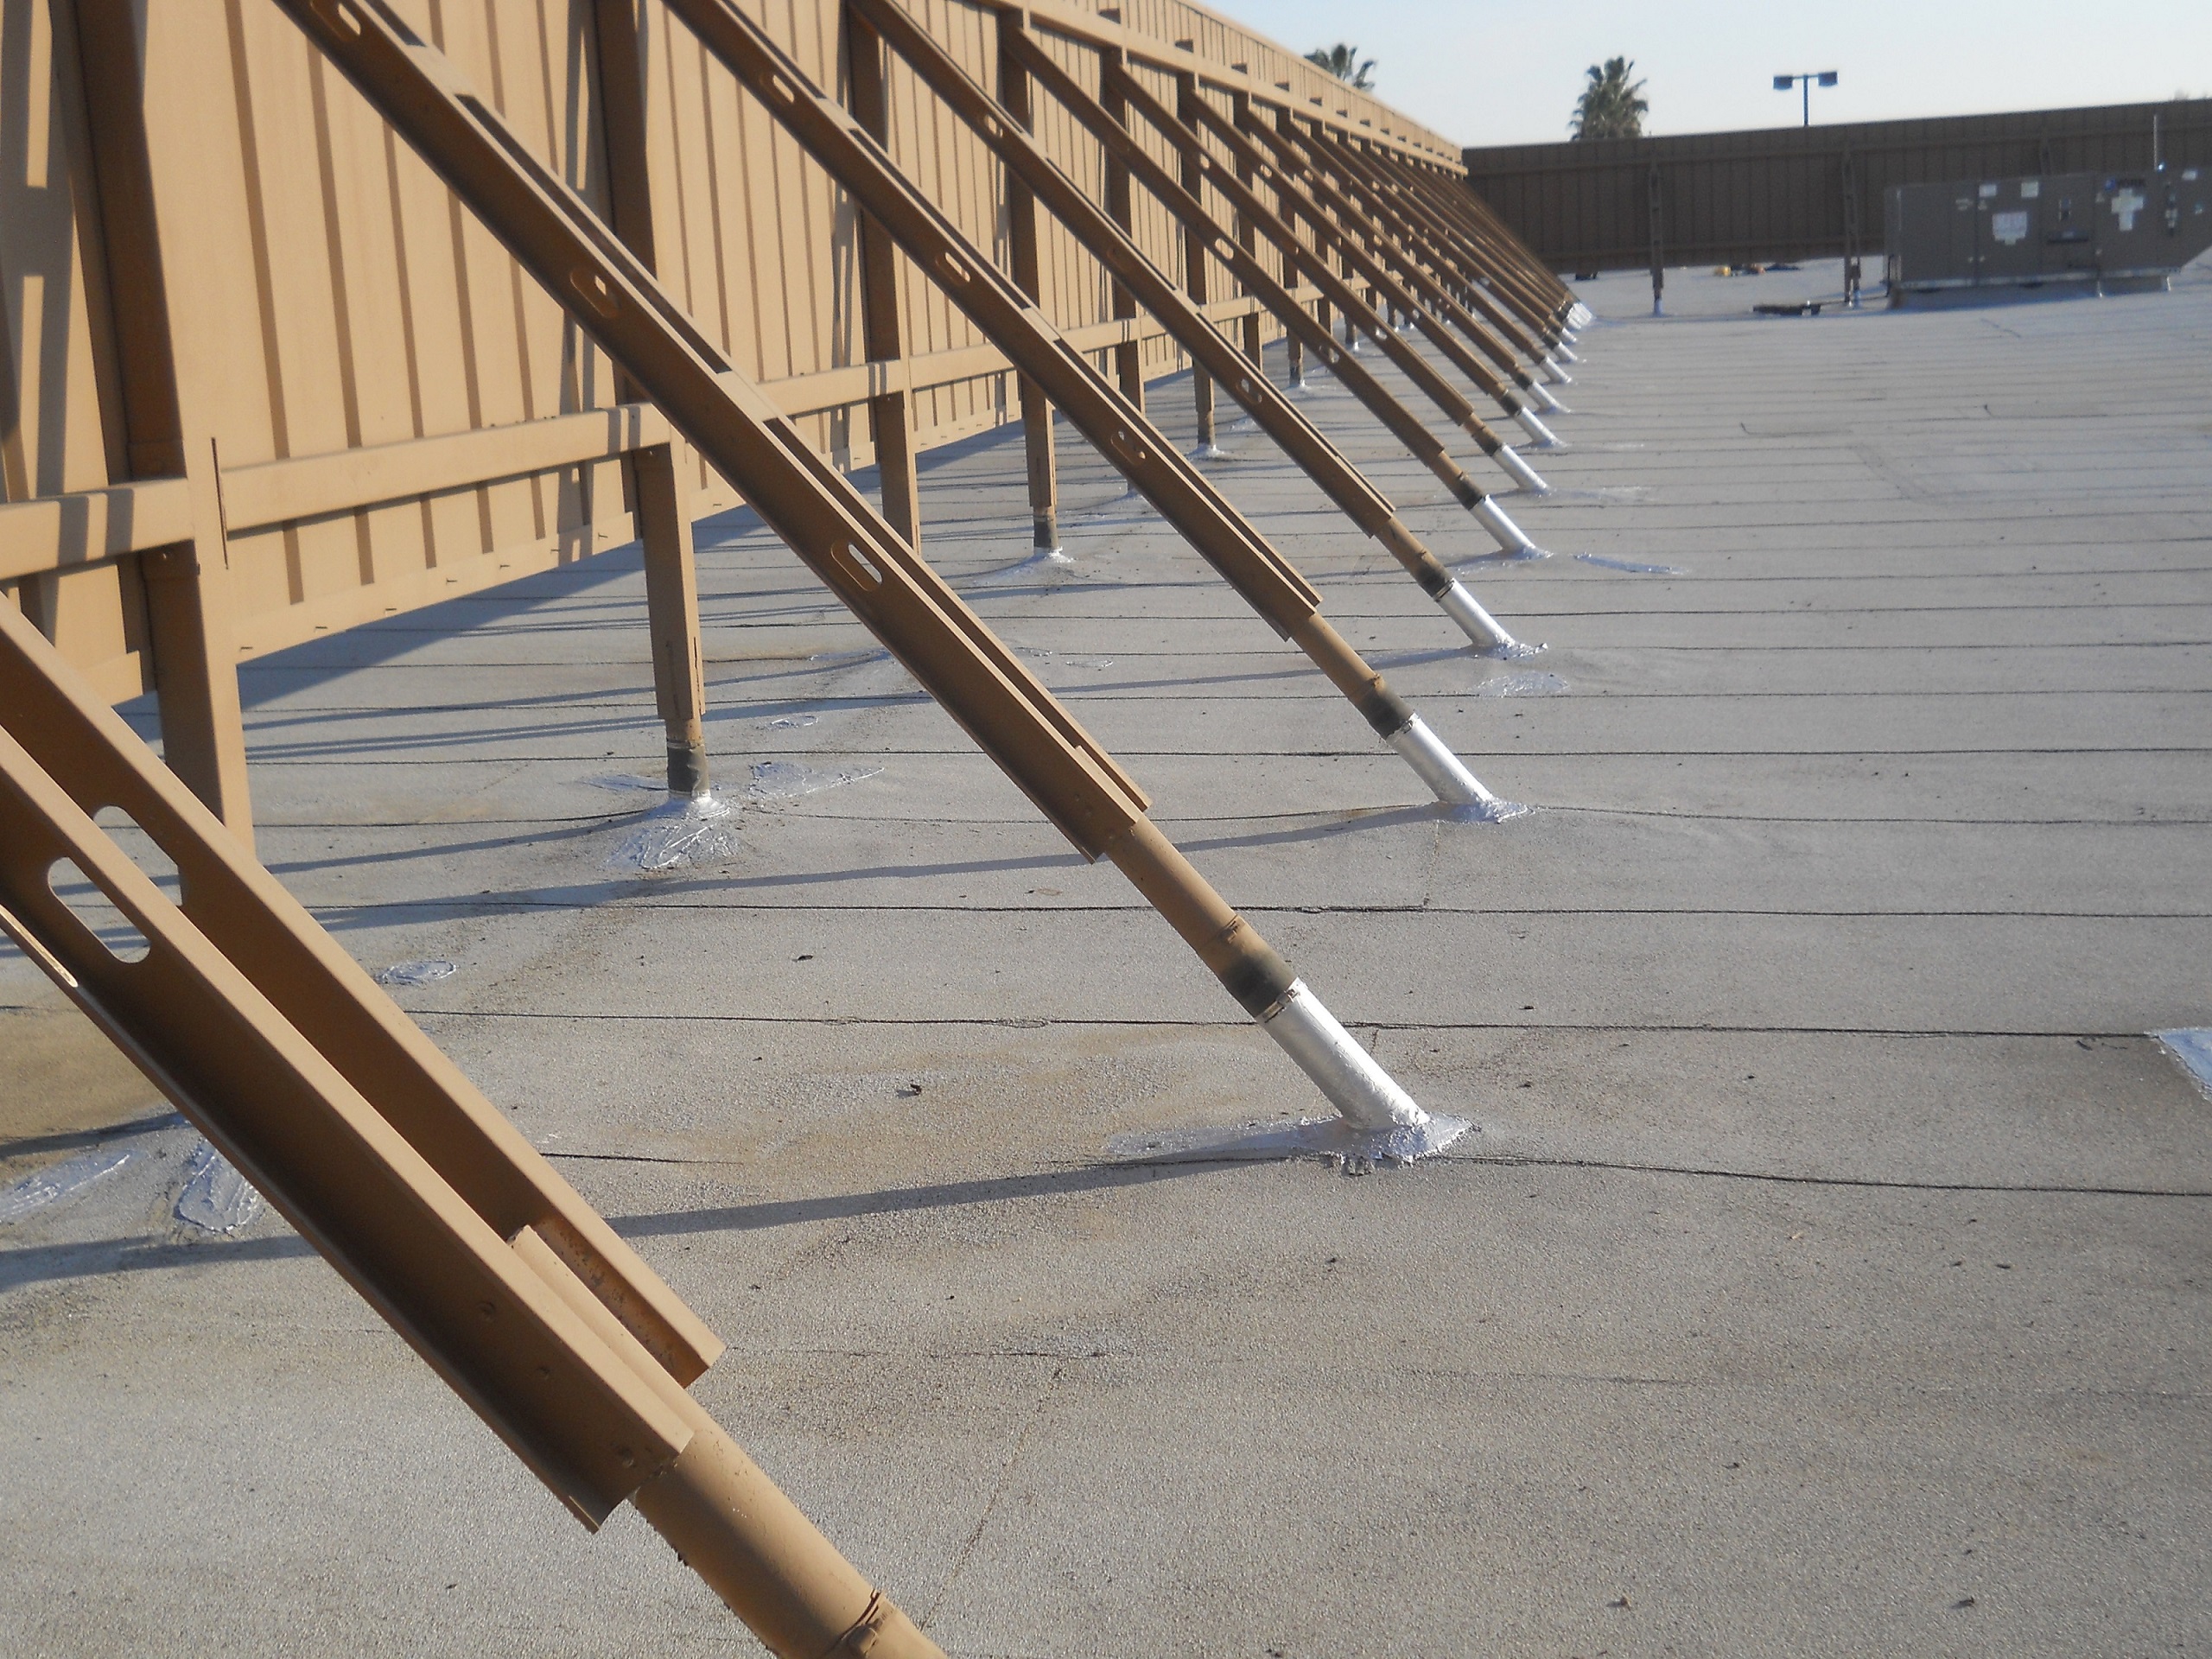 Properly maintained commercial roofing